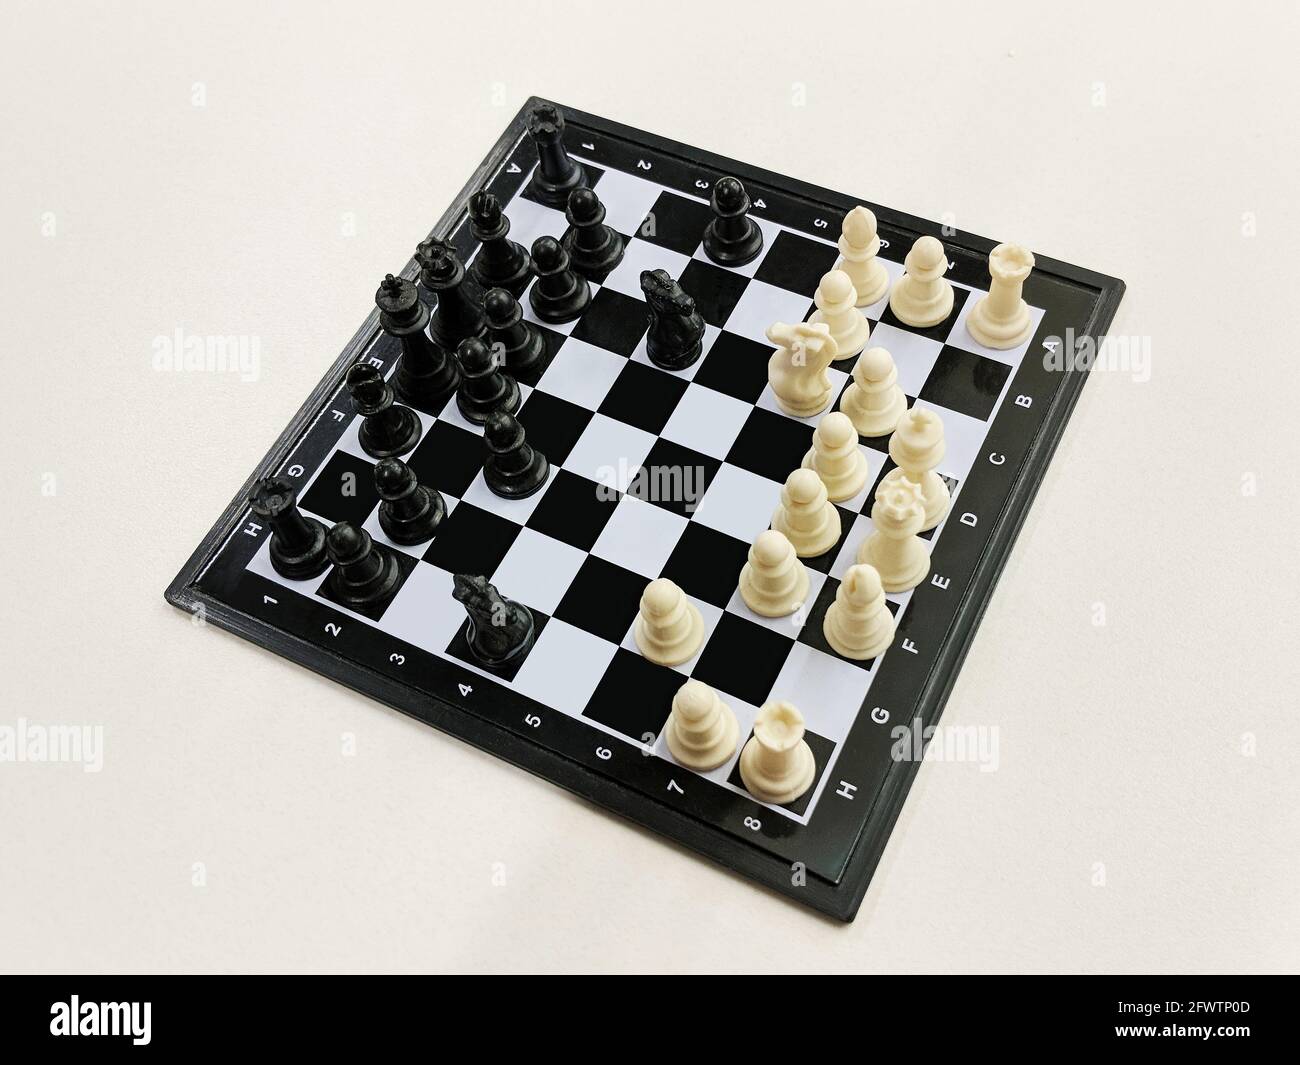 High angle view of travel chess set on a light background Stock Photo